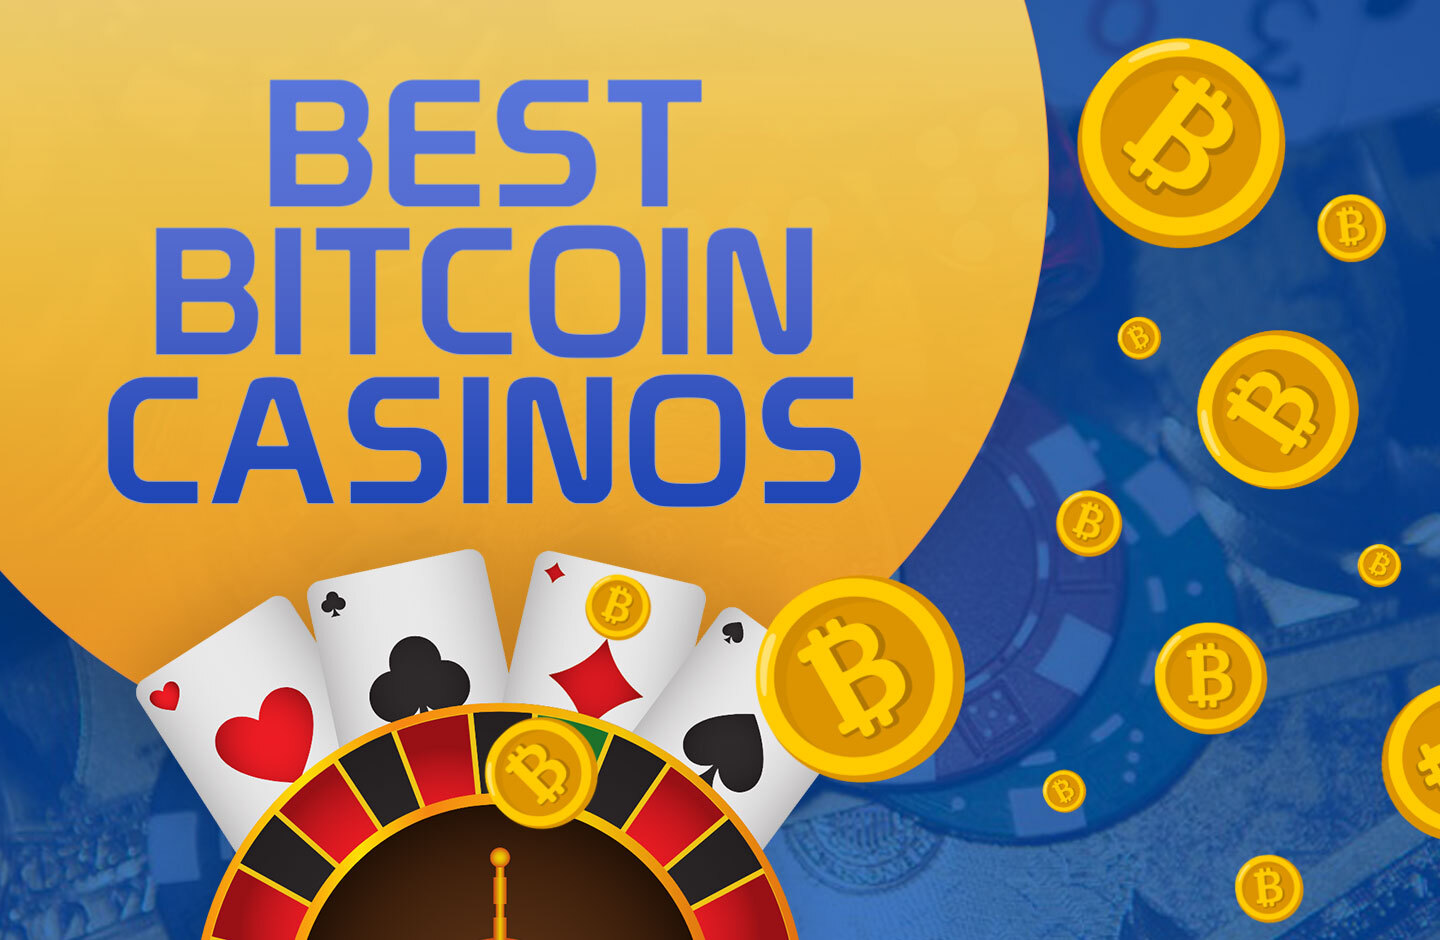 casino crypto: The Intersection of Skill and Luck